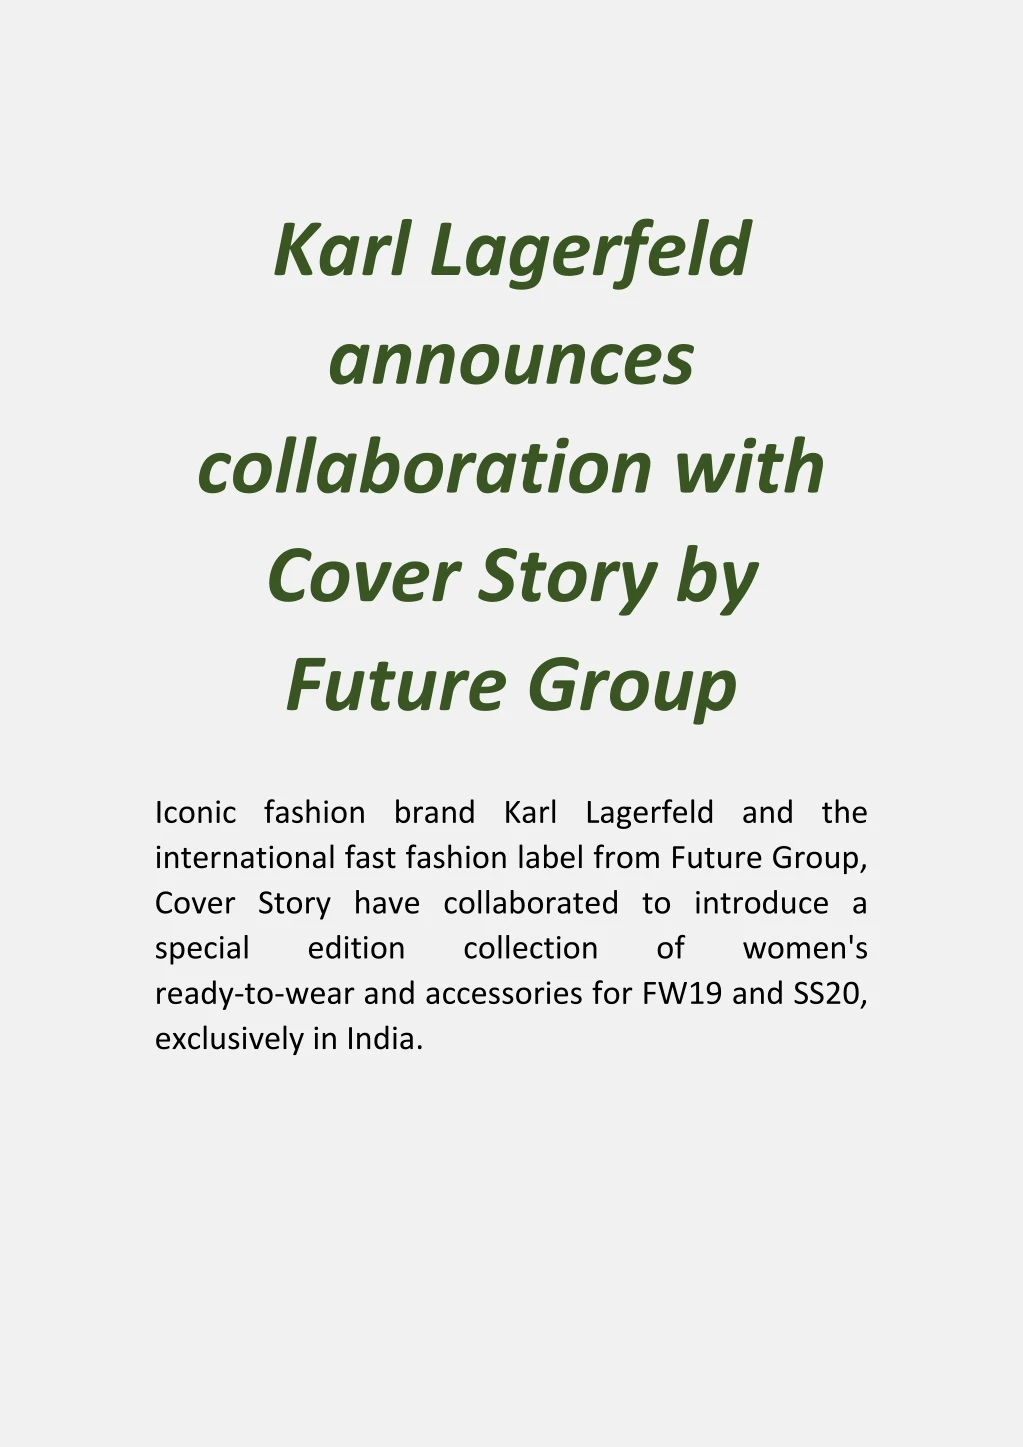 karl lagerfeld announces collaboration with cover